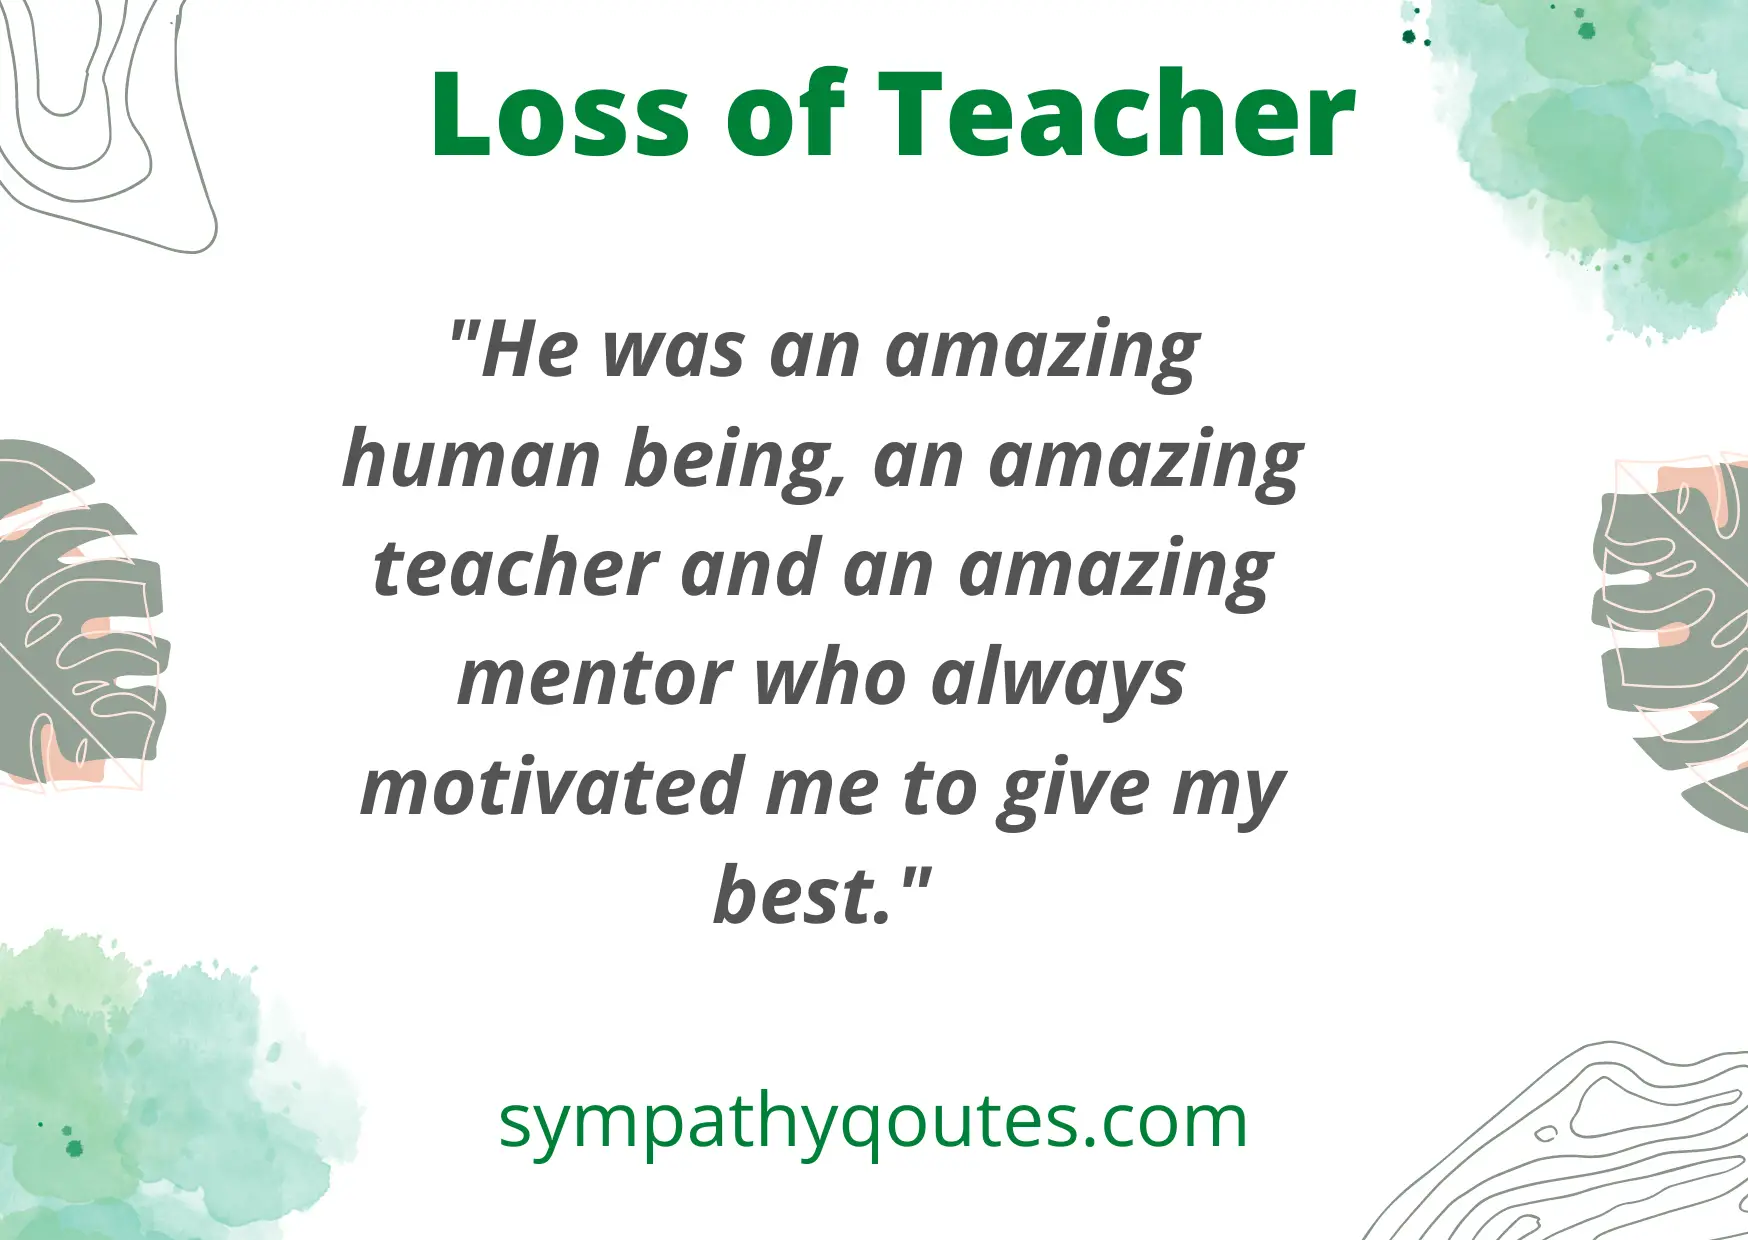 Sympathy Quotes for Loss of Teacher